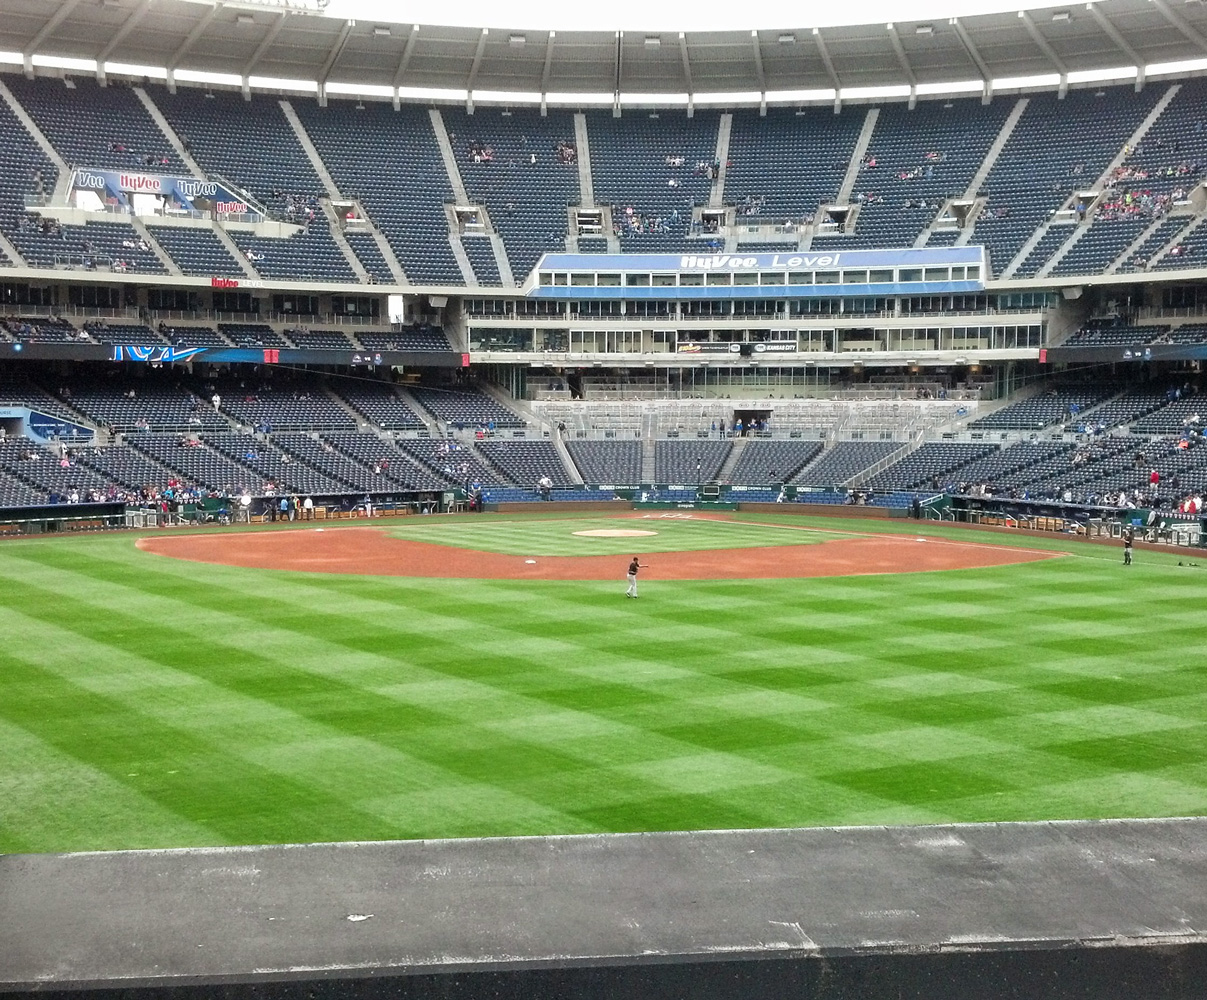 The boys’ view from their seats during the day game. 